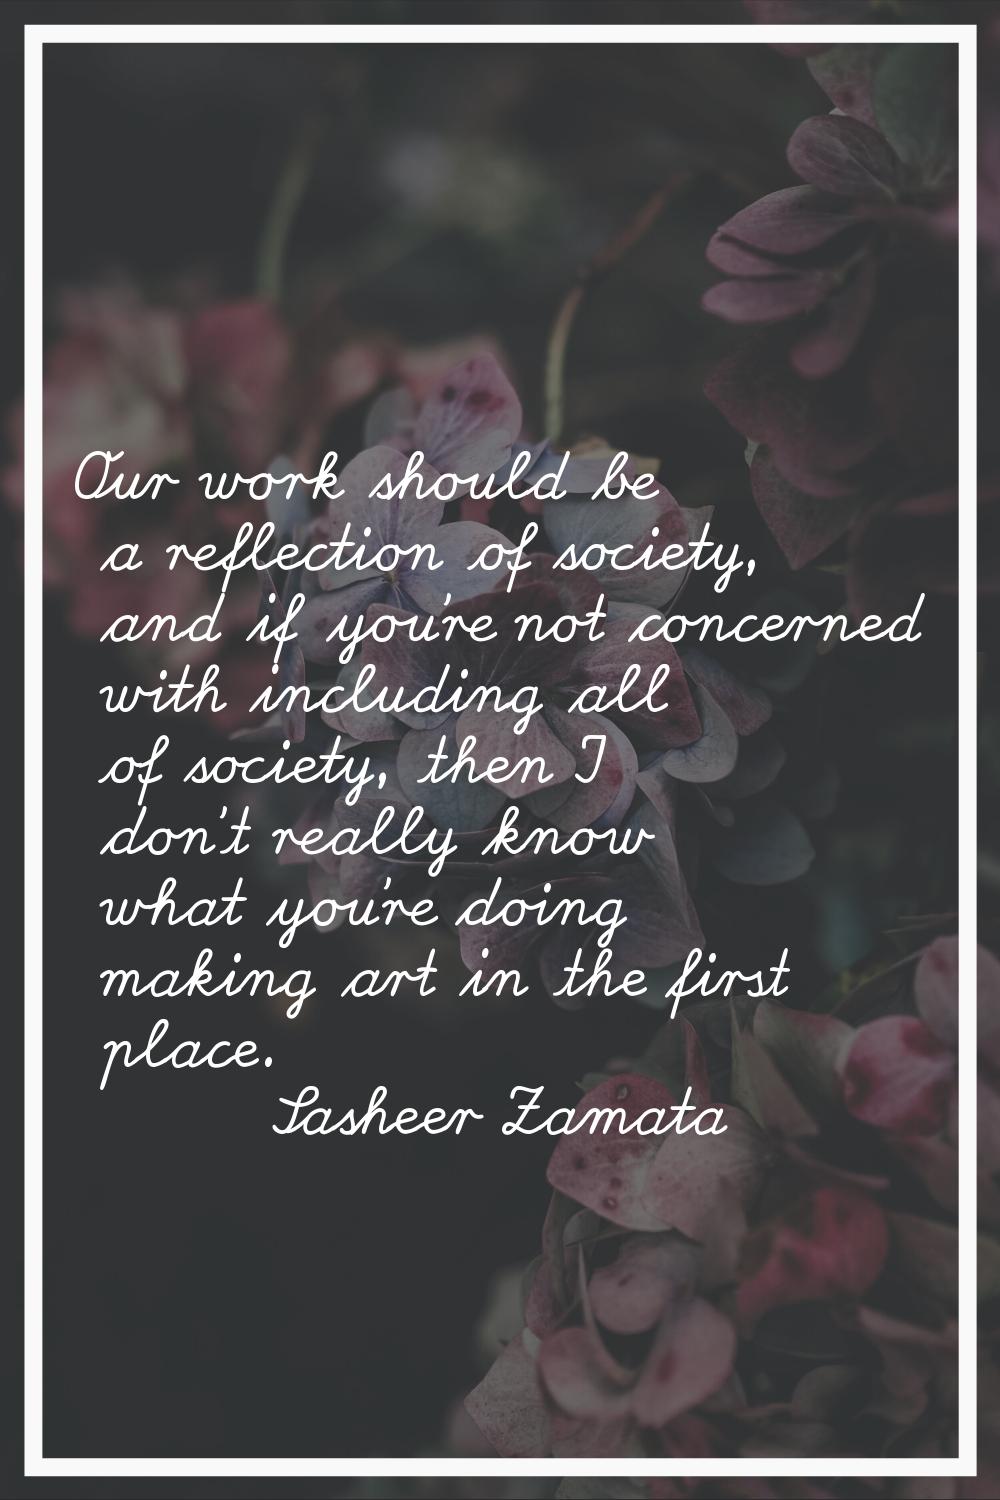 Our work should be a reflection of society, and if you're not concerned with including all of socie